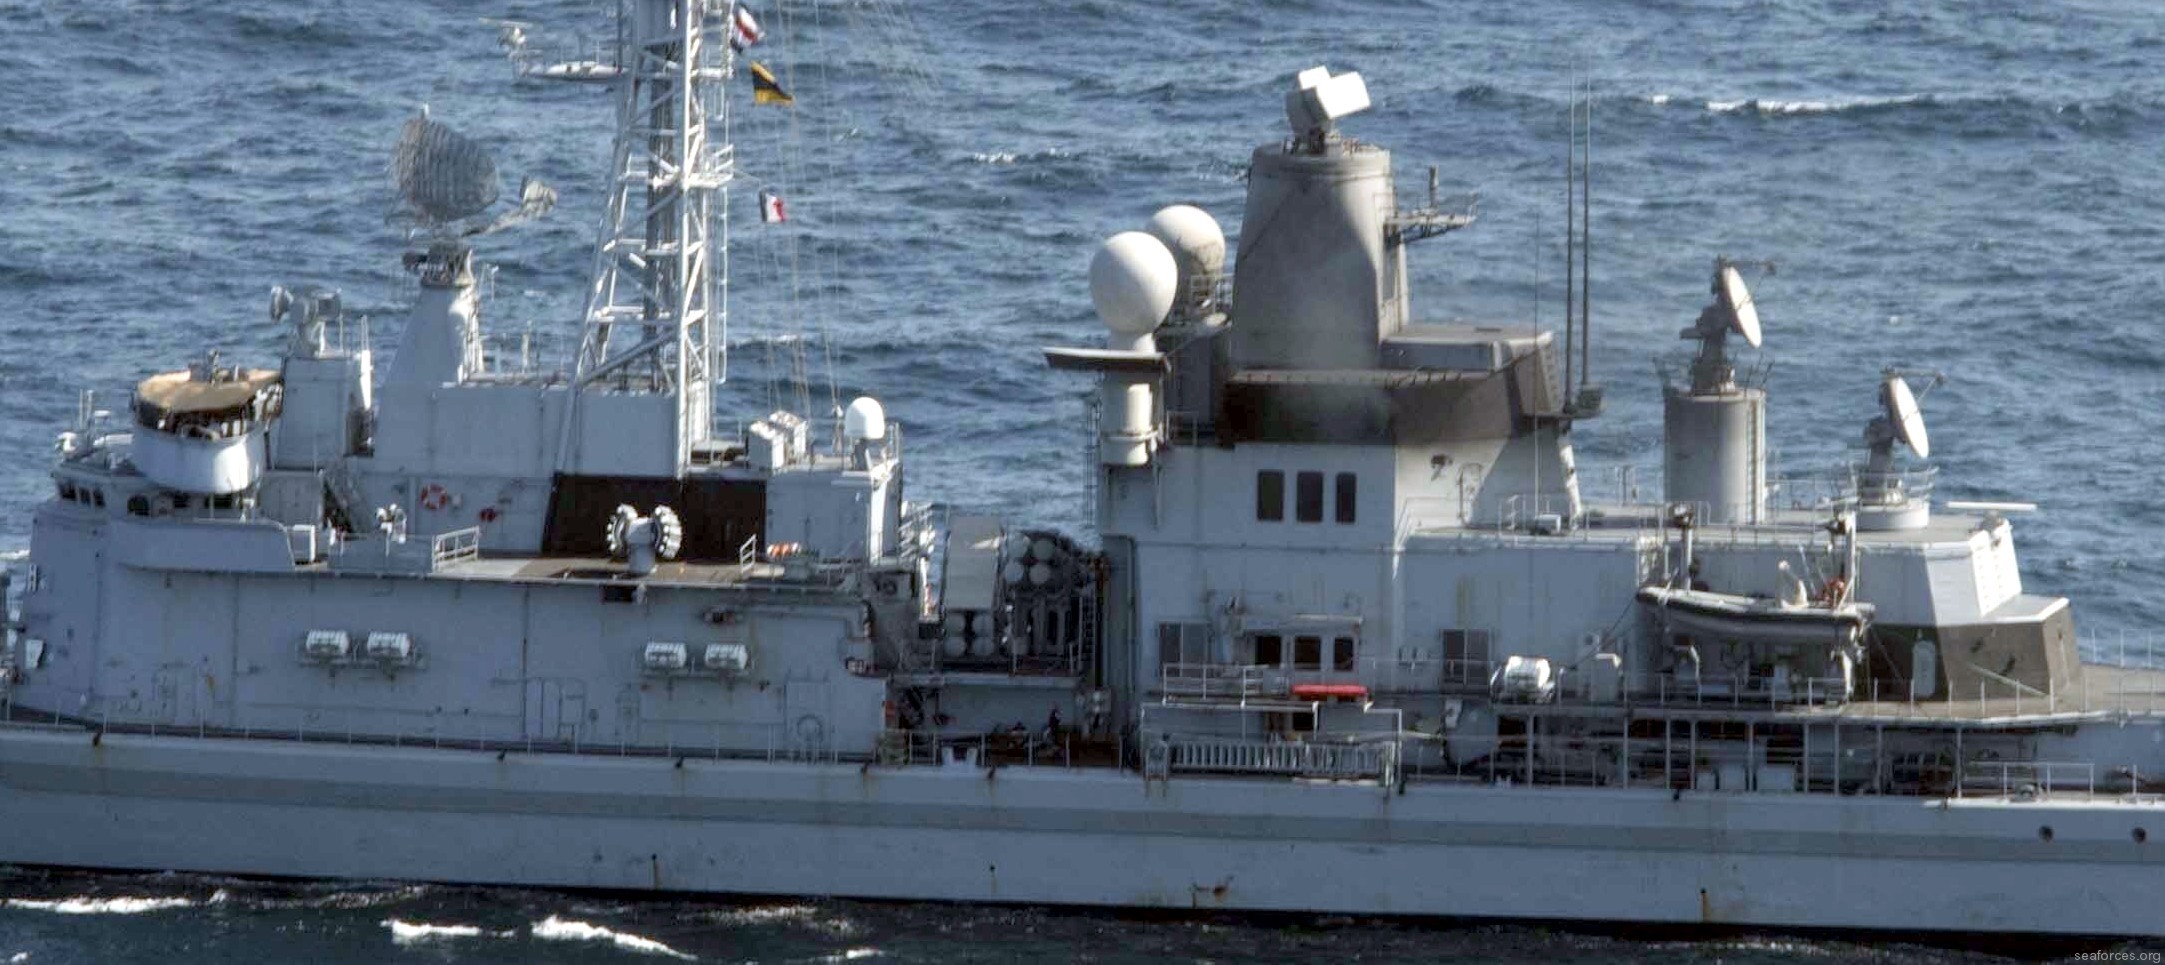 d-614 fs cassard f70aa class guided missile frigate ffgh ddg french navy marine nationale 13a mm40 exocet ssm